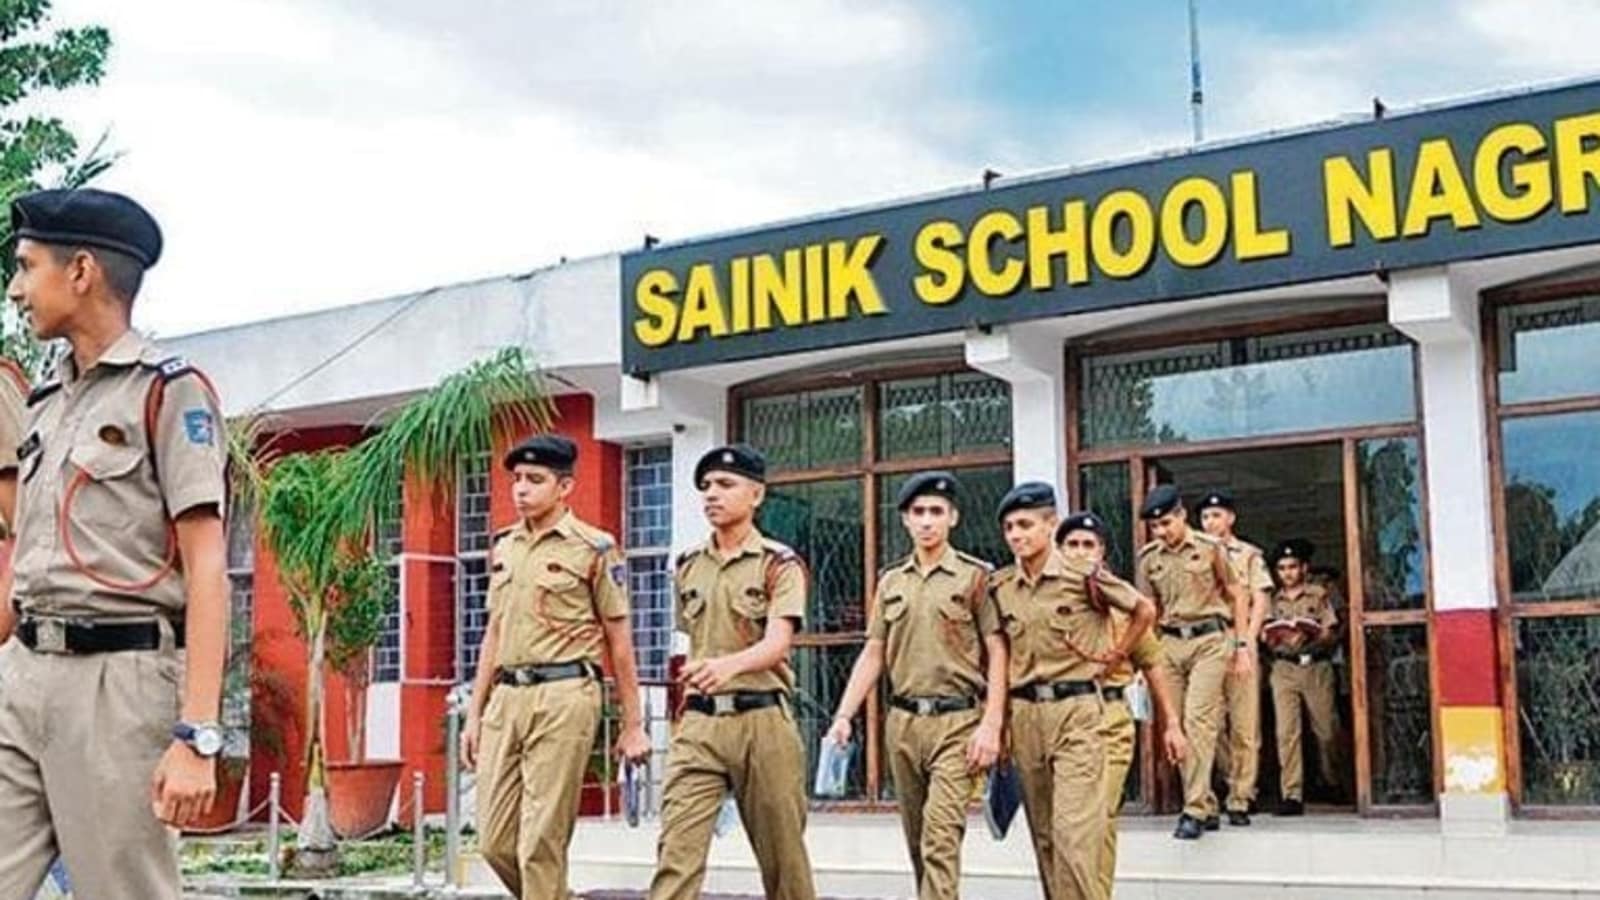 Bangalore School Girls Free Porn Veedios - Sainik Schools now open for girls as well: All you need to know | Latest  News India - Hindustan Times